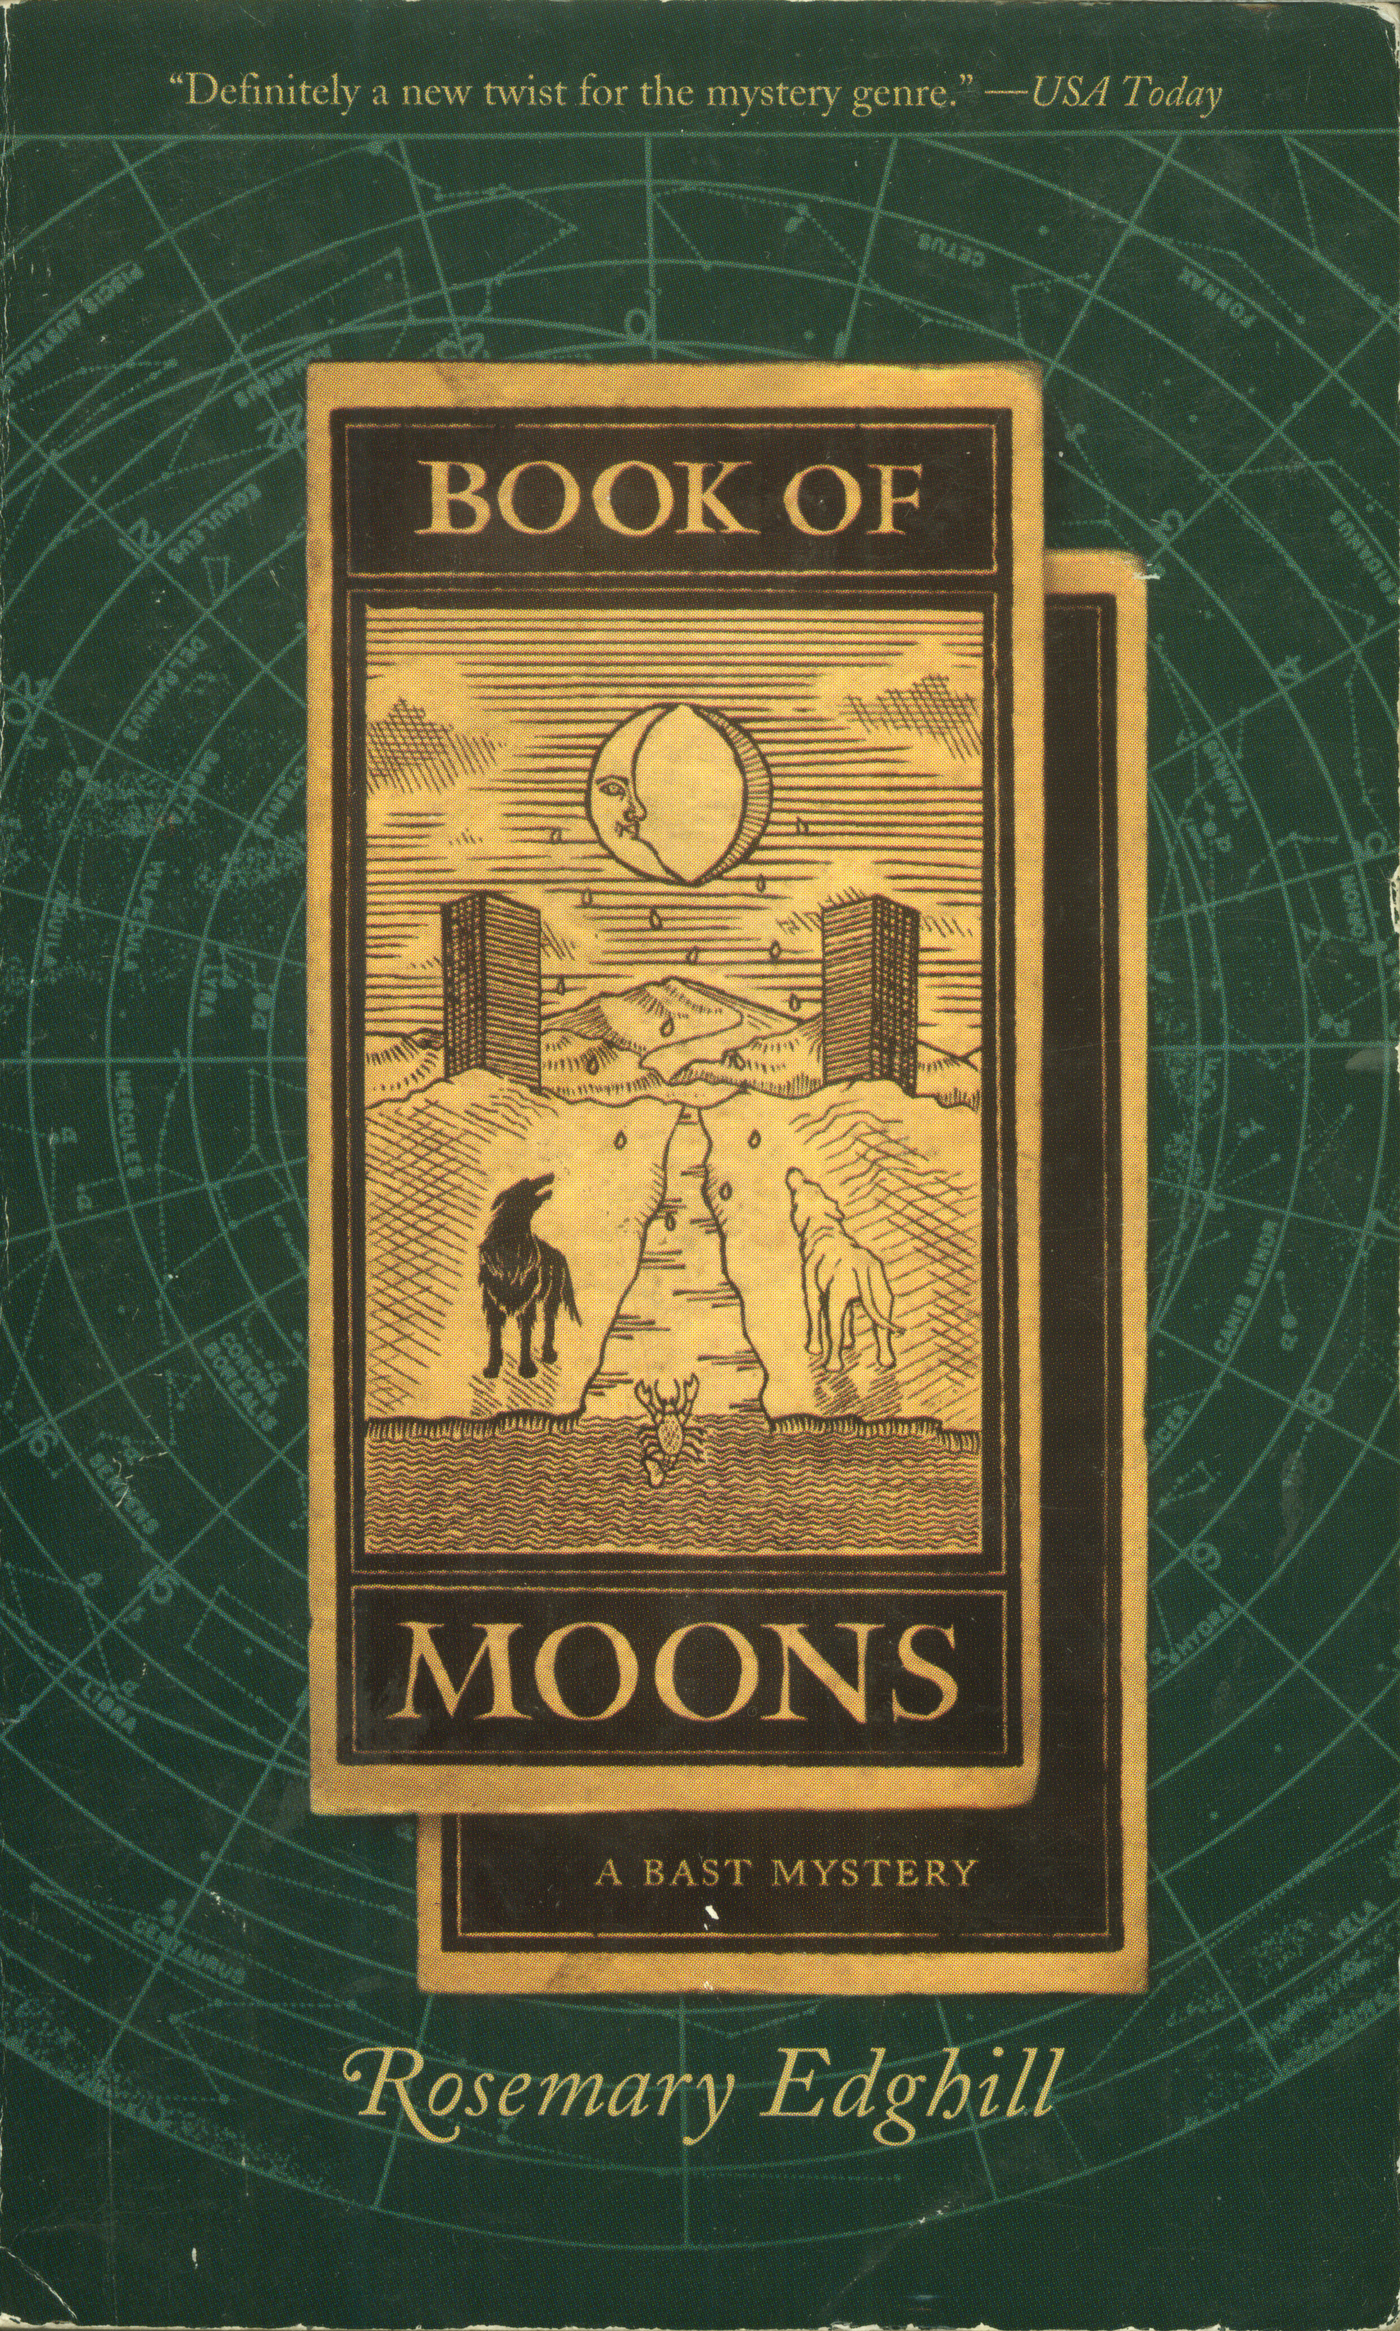 Book of Moons : A Bast Mystery by Rosemary Edghill